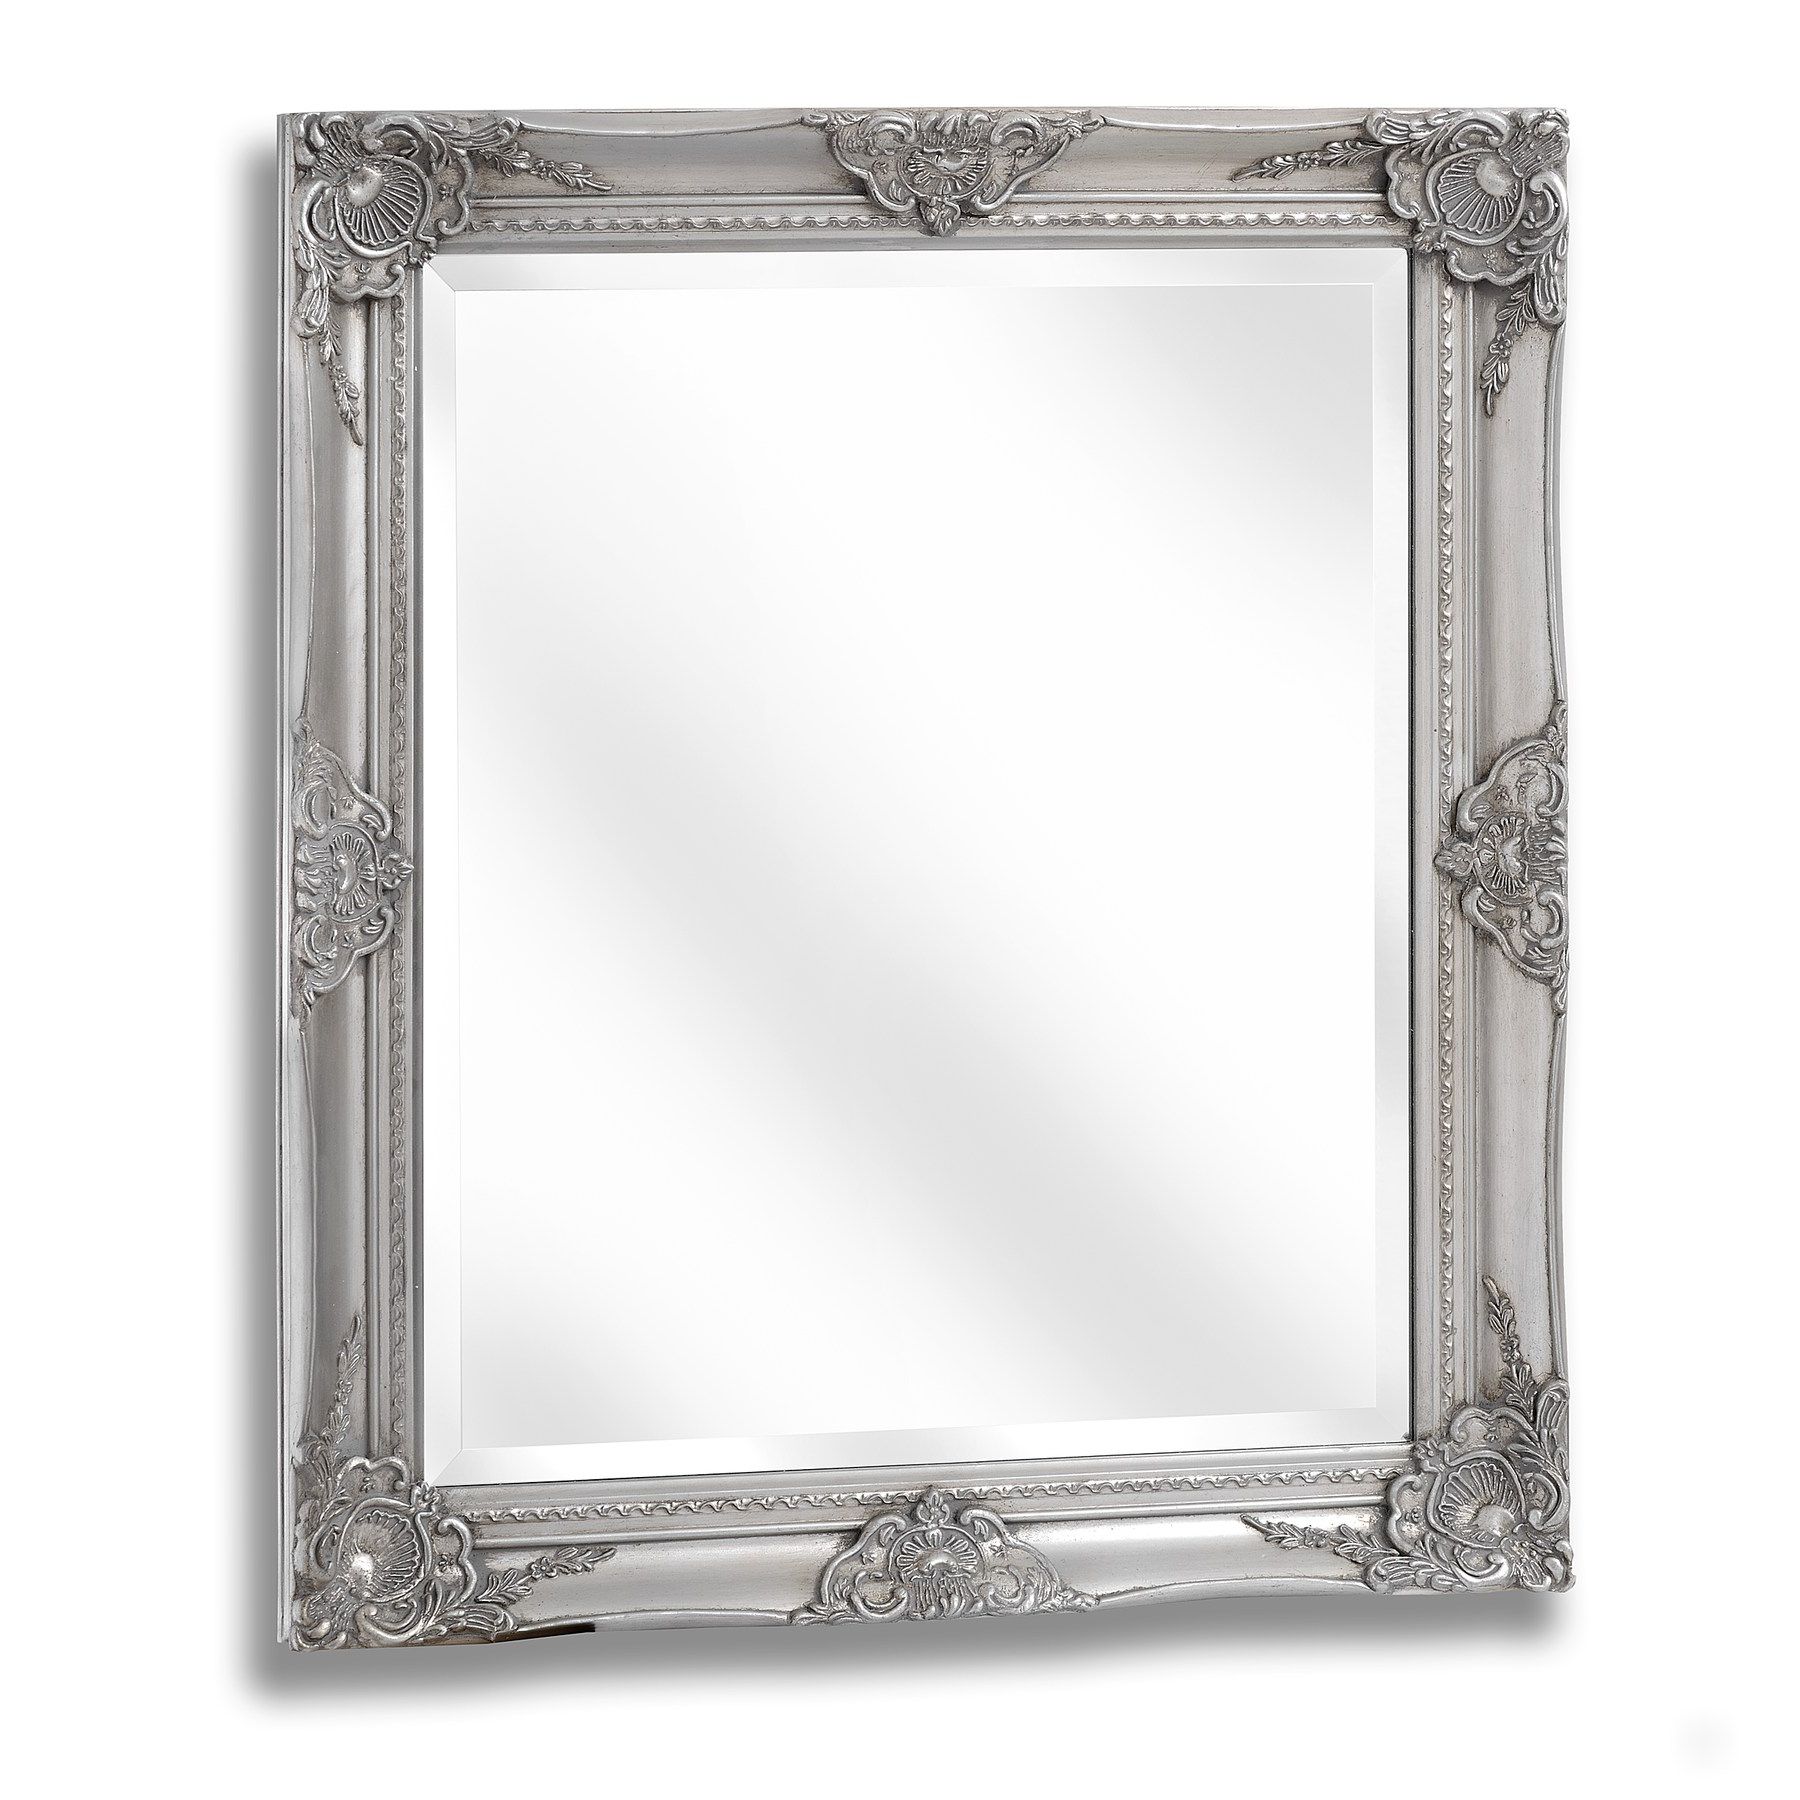 Latest Antiqued Silver Quatrefoil Wall Mirrors Intended For Baroque Antique Silver Mirror – Hollygrove (View 5 of 15)